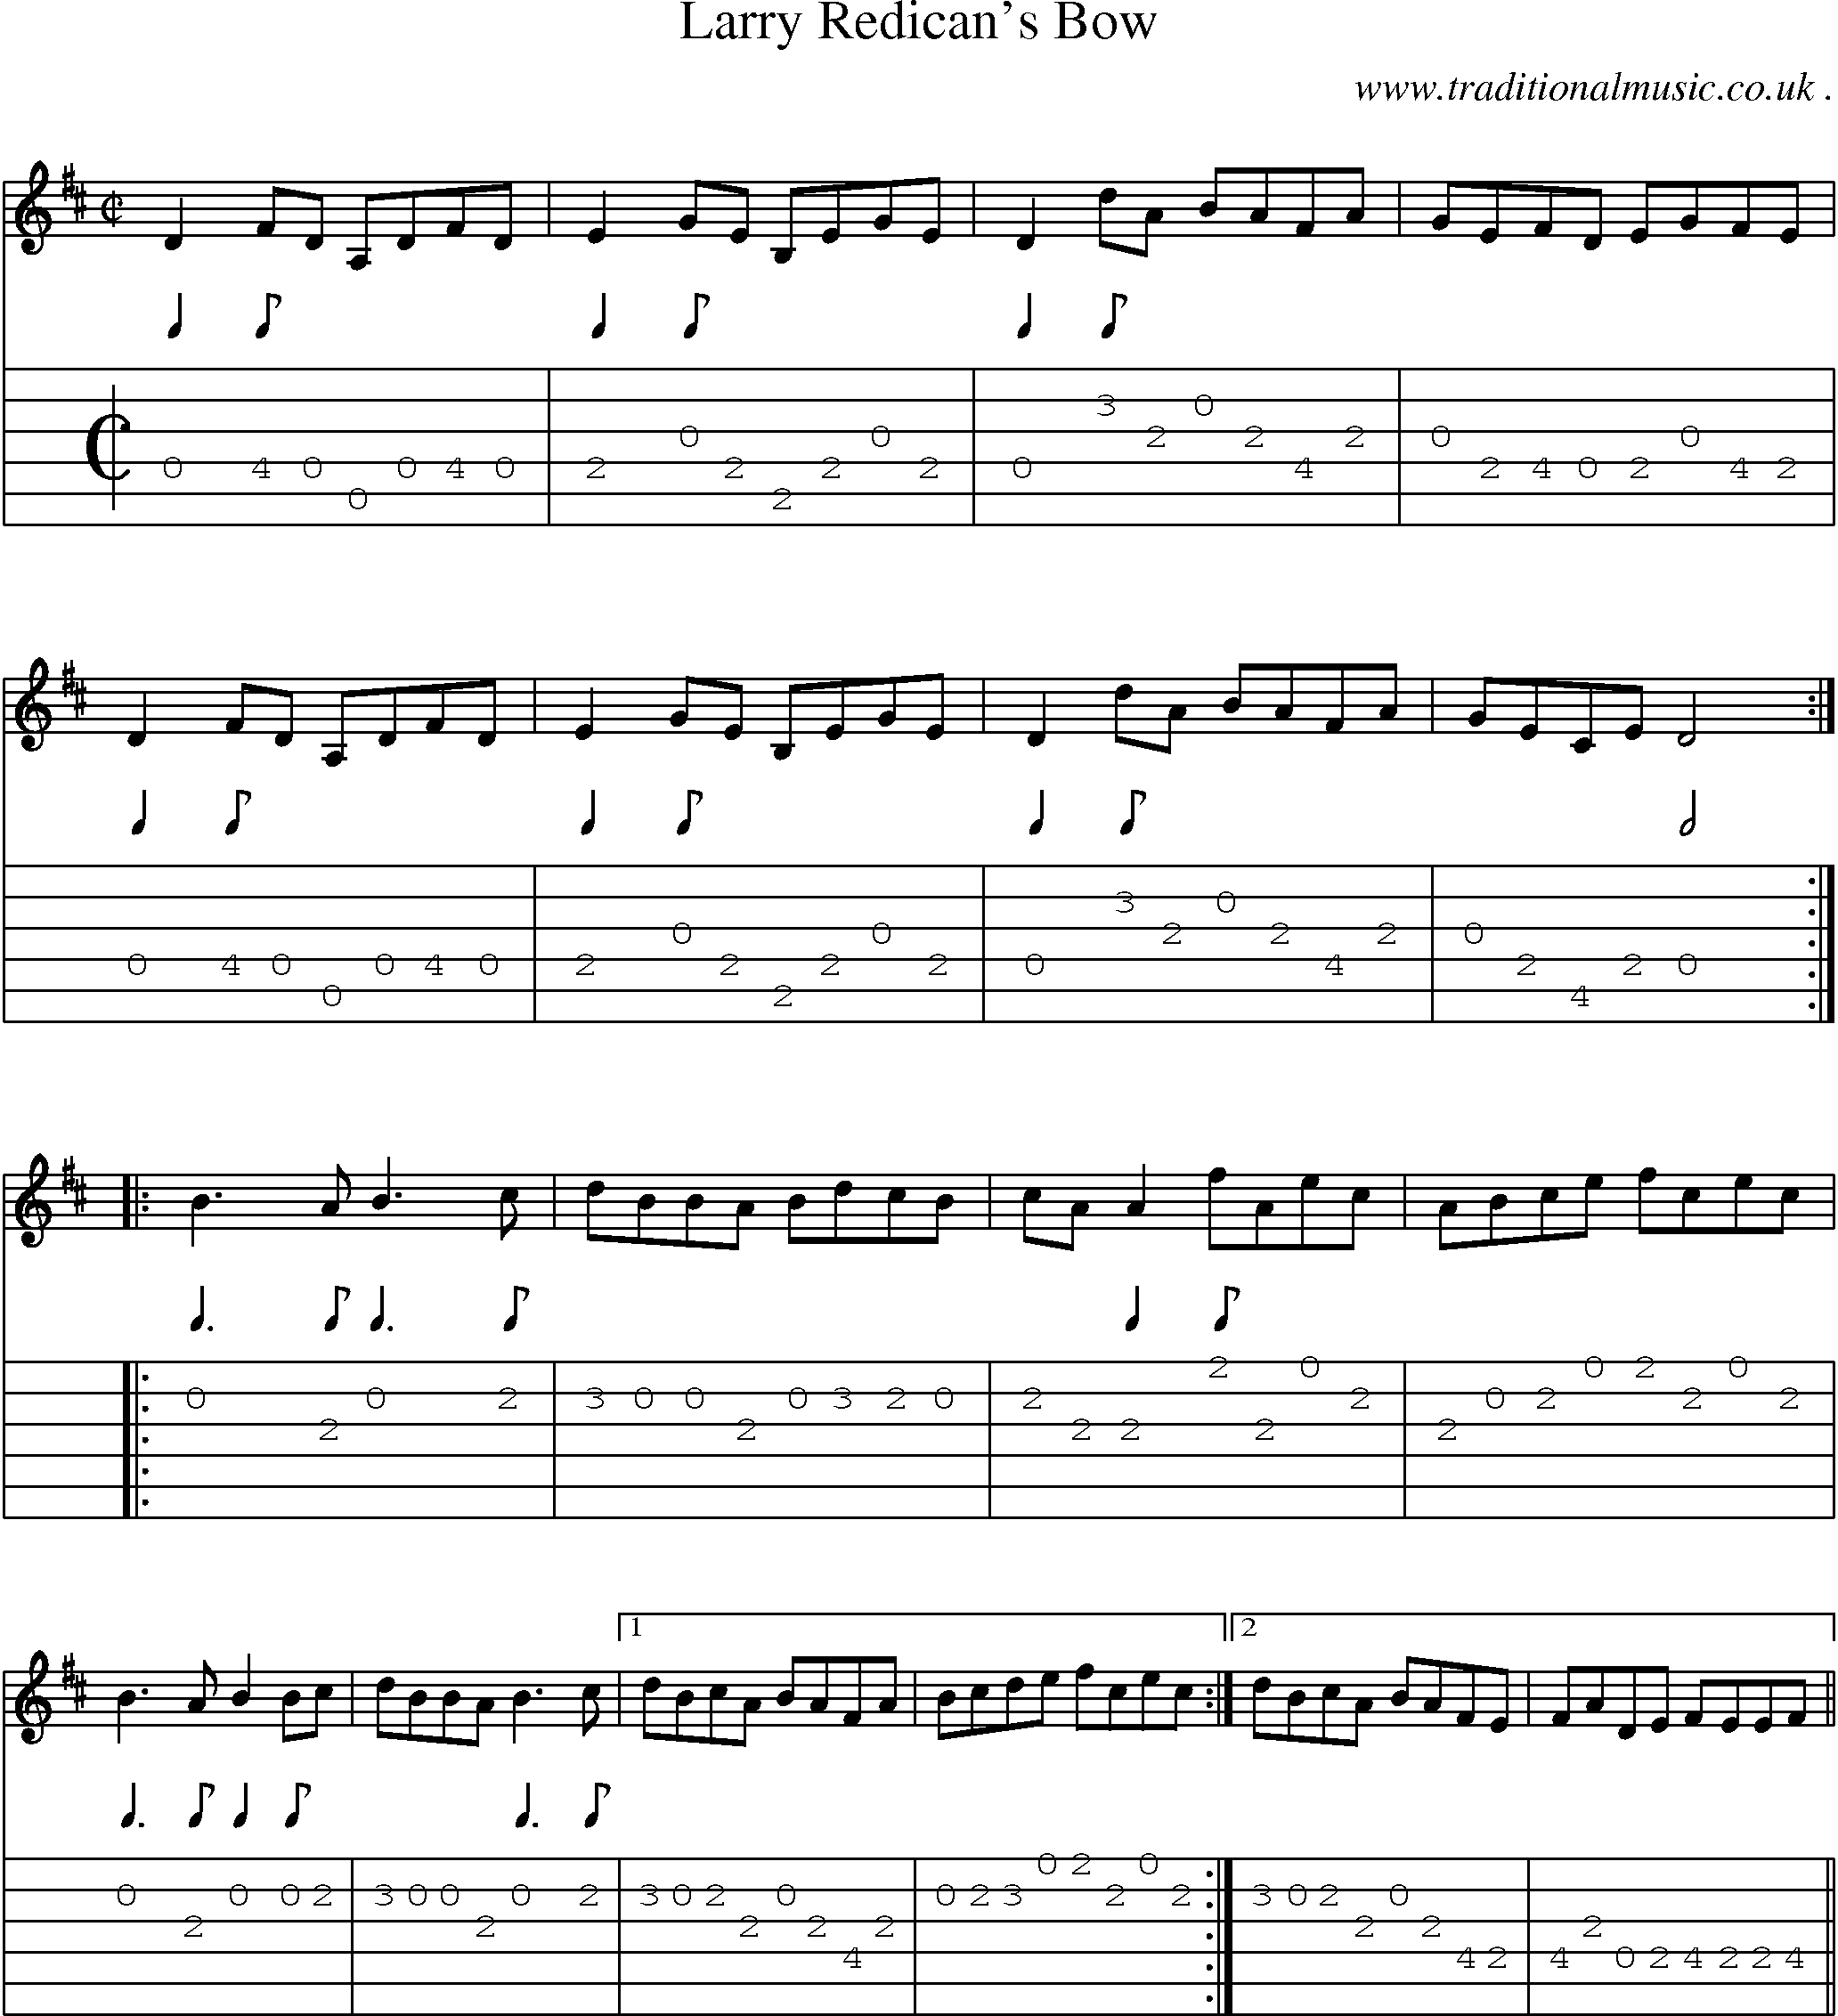 Sheet-Music and Guitar Tabs for Larry Redicans Bow